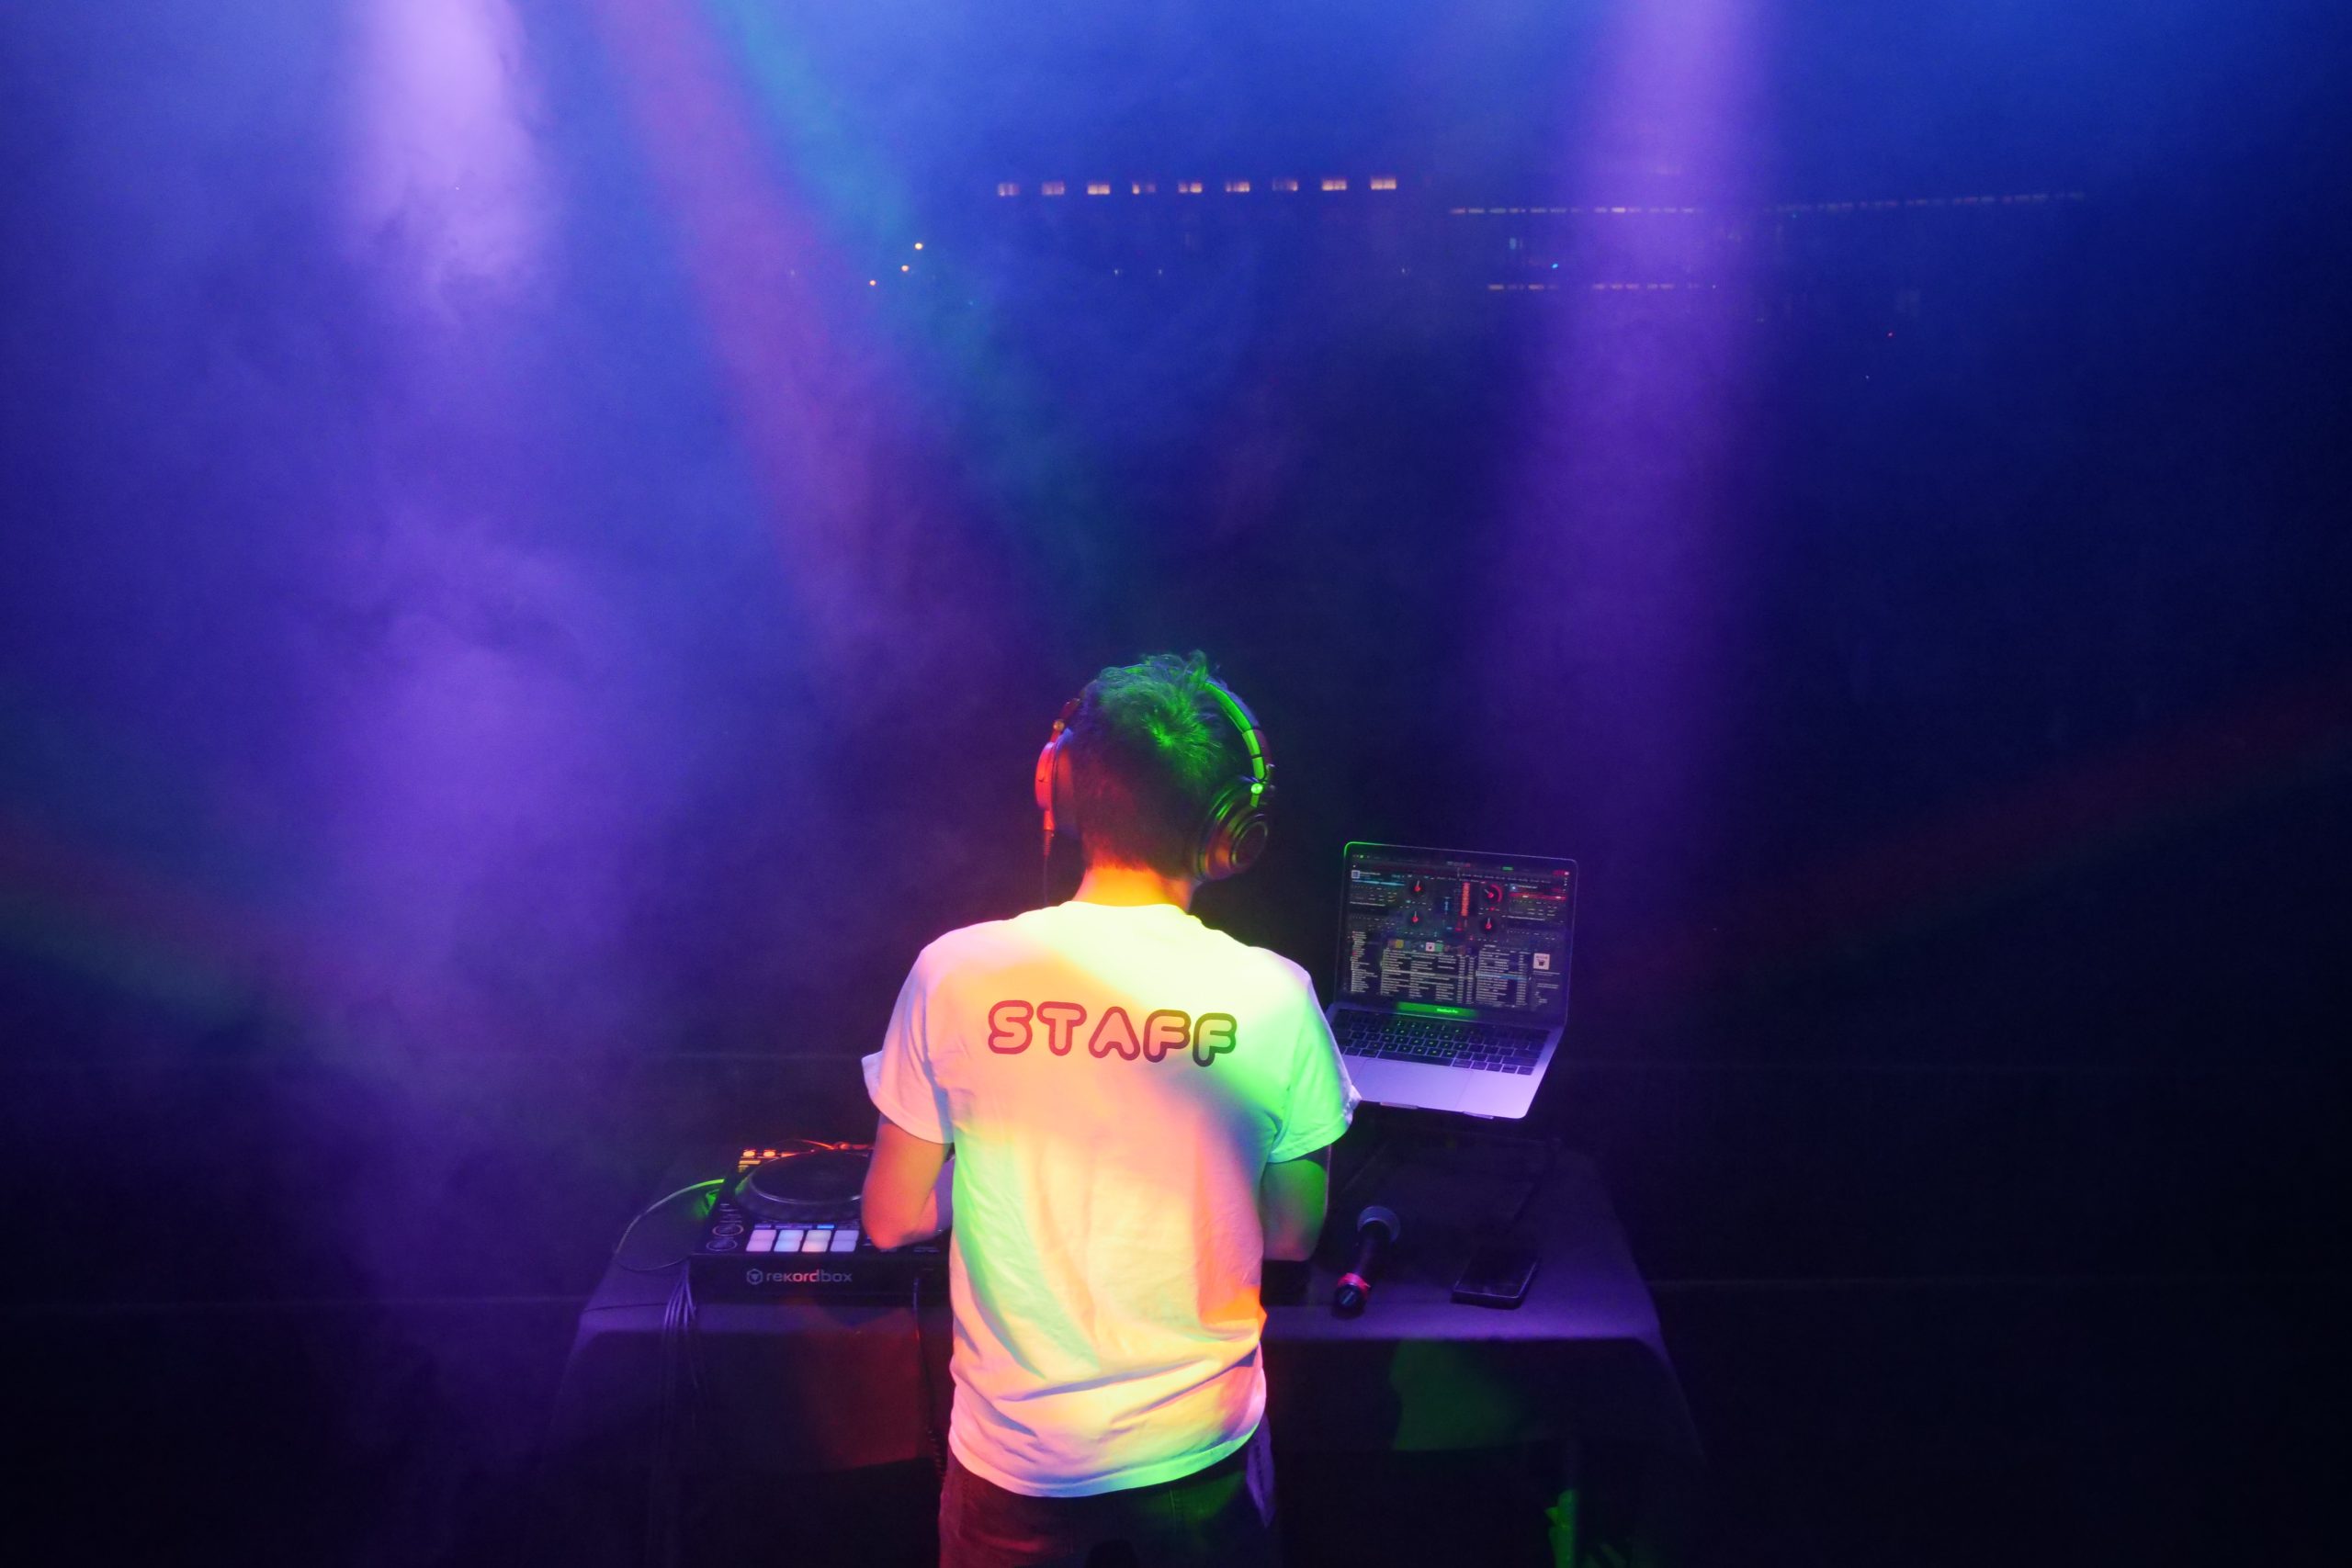 Photo of Caleb DeLaBruere DJing on a stage with colored light